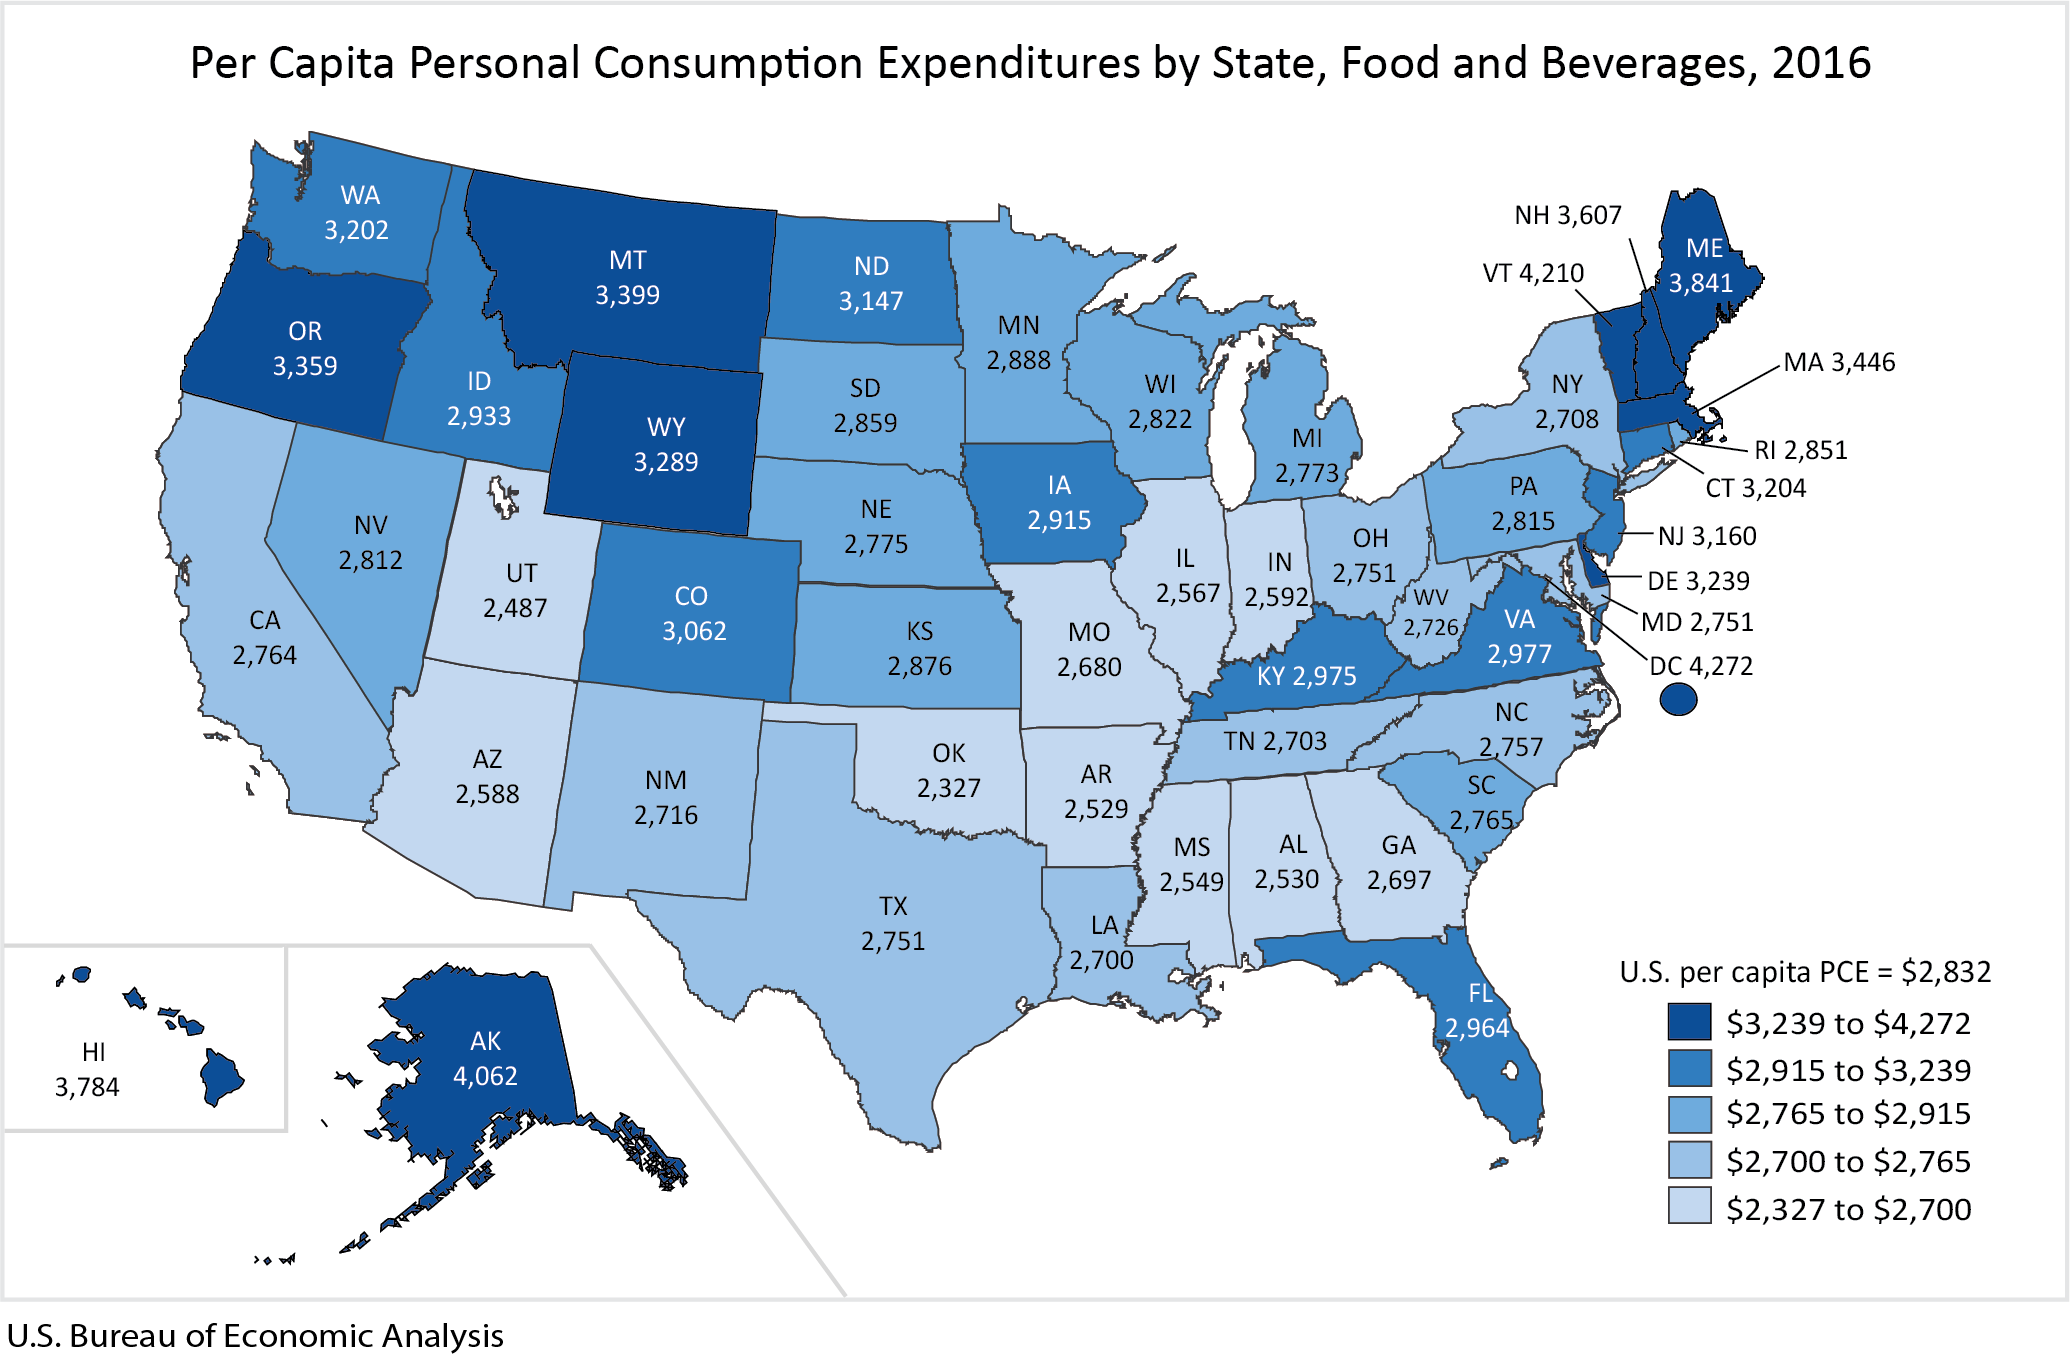 Per Capita Personal Consumption Expenditures by State, Food and Beverages, 2016